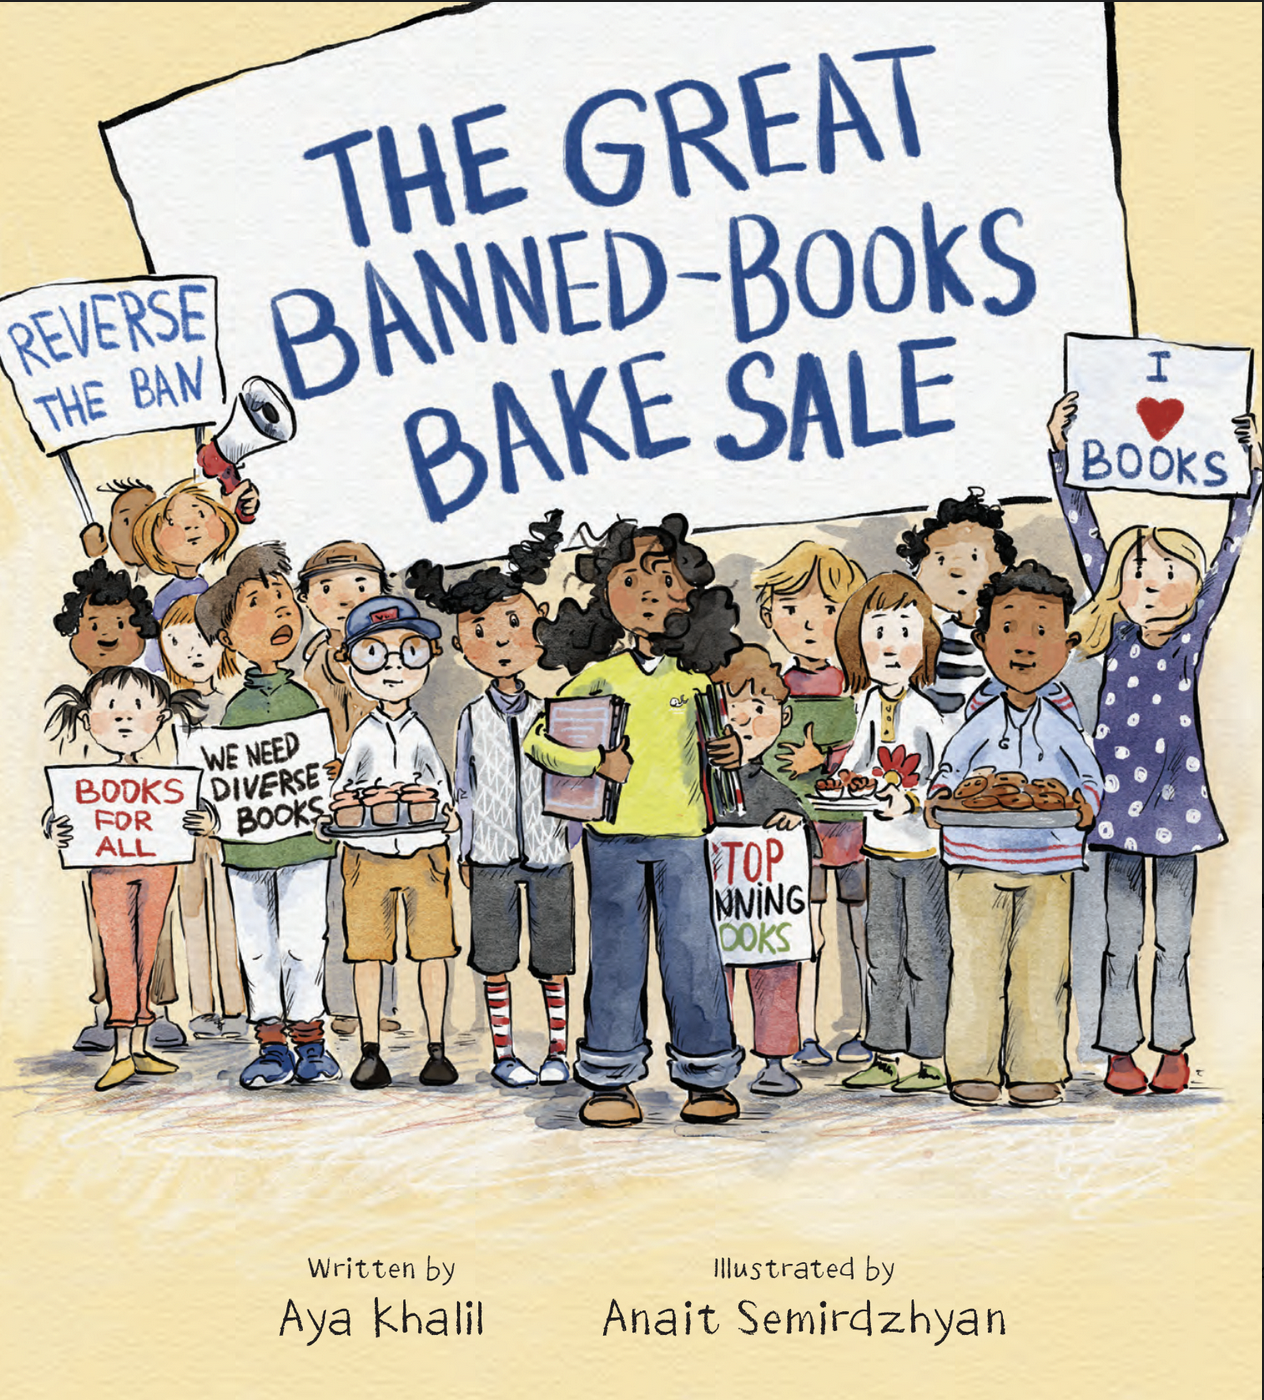 Banned Books and Bake Sales: An Interview with Aya Khalil and a Look at Picture Books Tackling Censorship